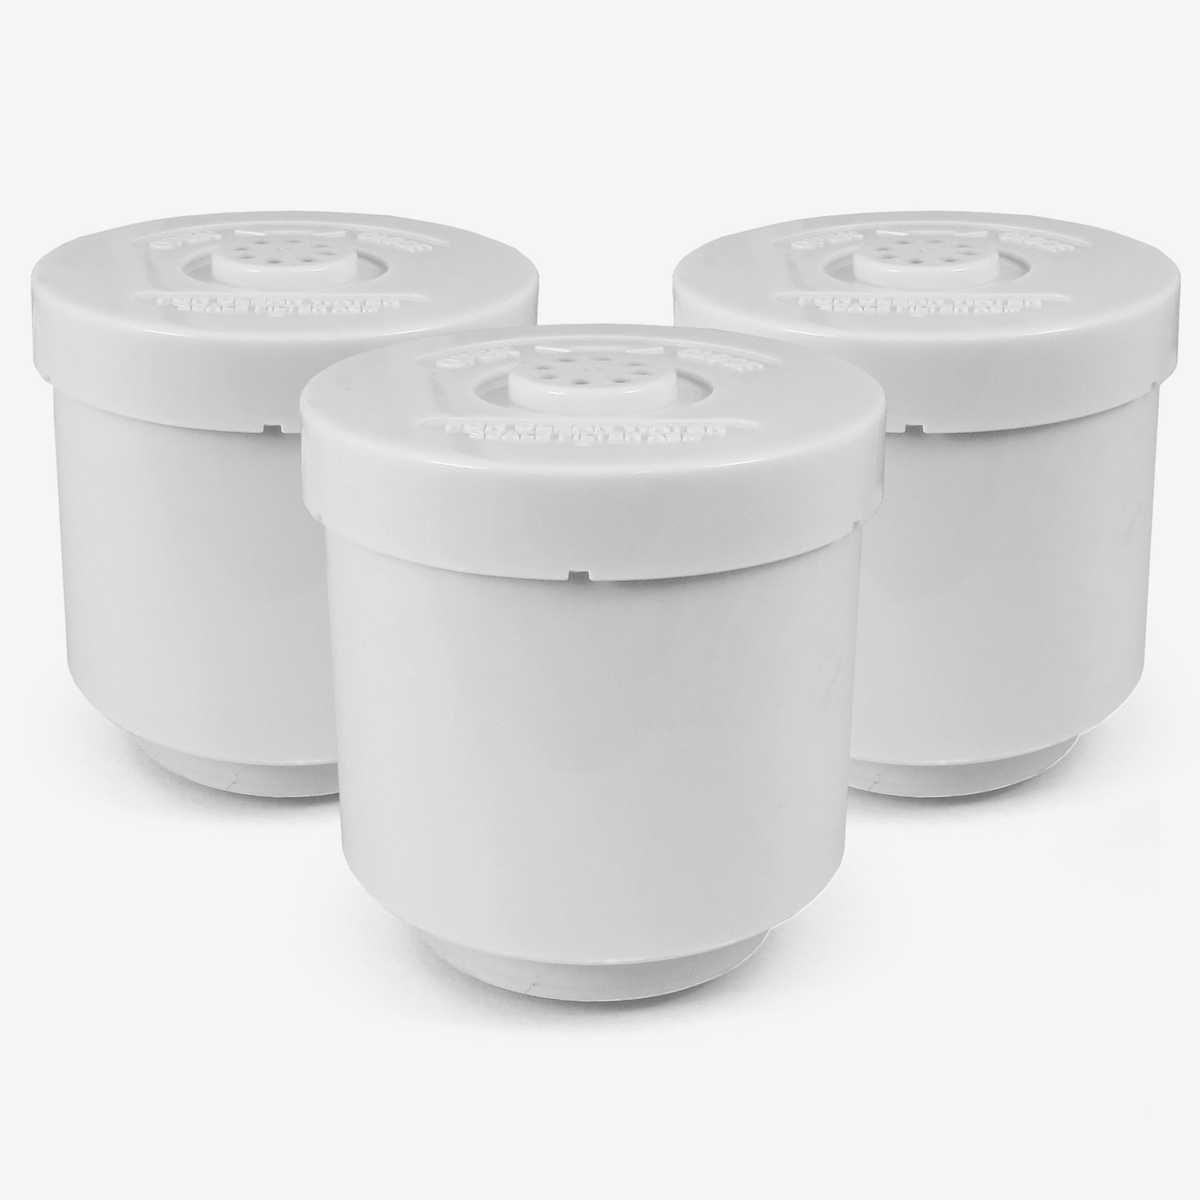 Replacement Filters for 3.5L Ultrasonic Humidifier - 3x